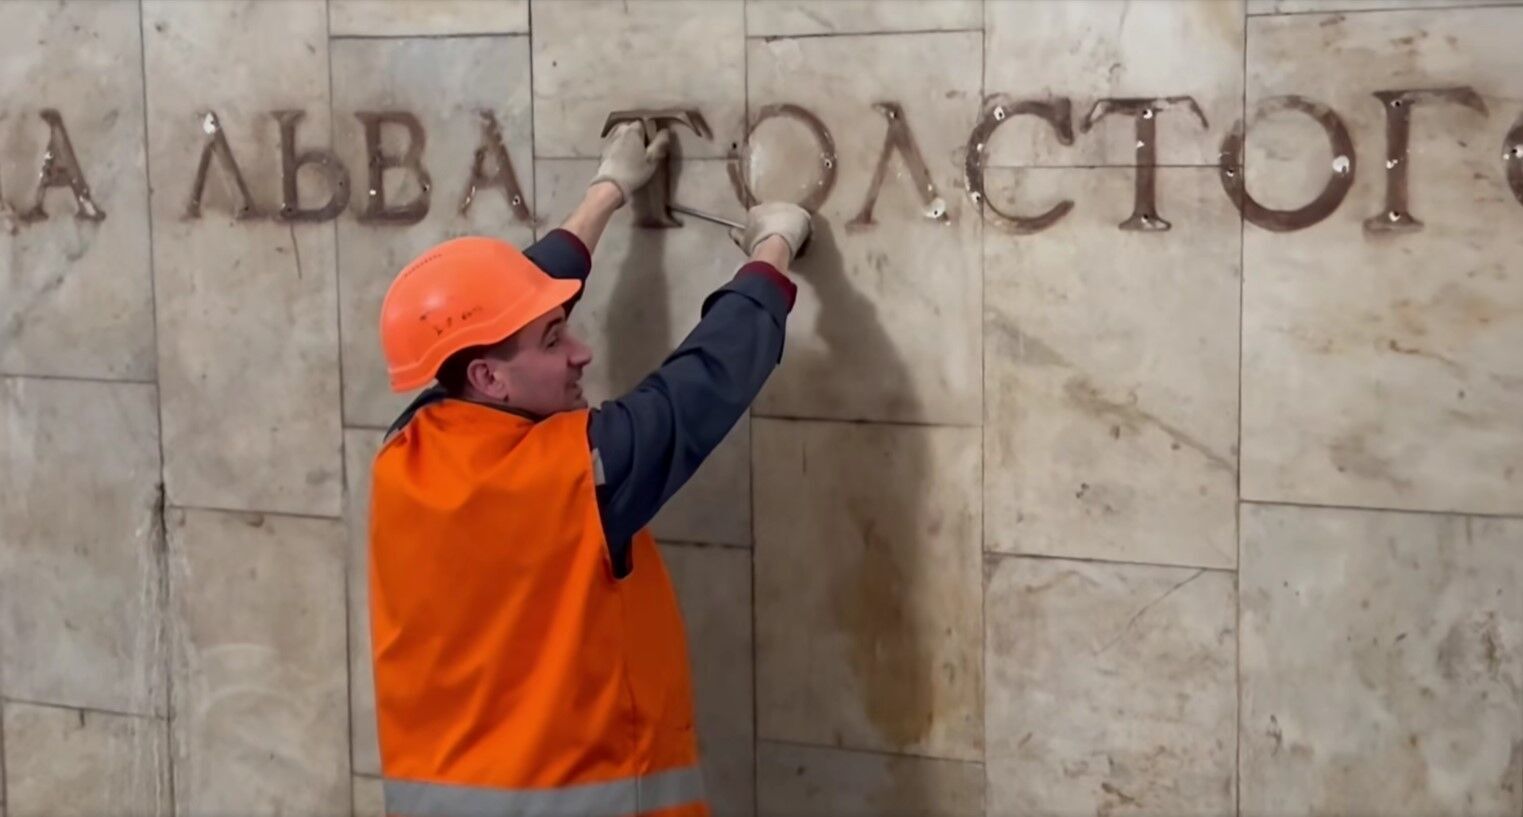 Derussification continues: the name of the station Square of Leo Tolstoy dismantled in Kyiv metro. Video